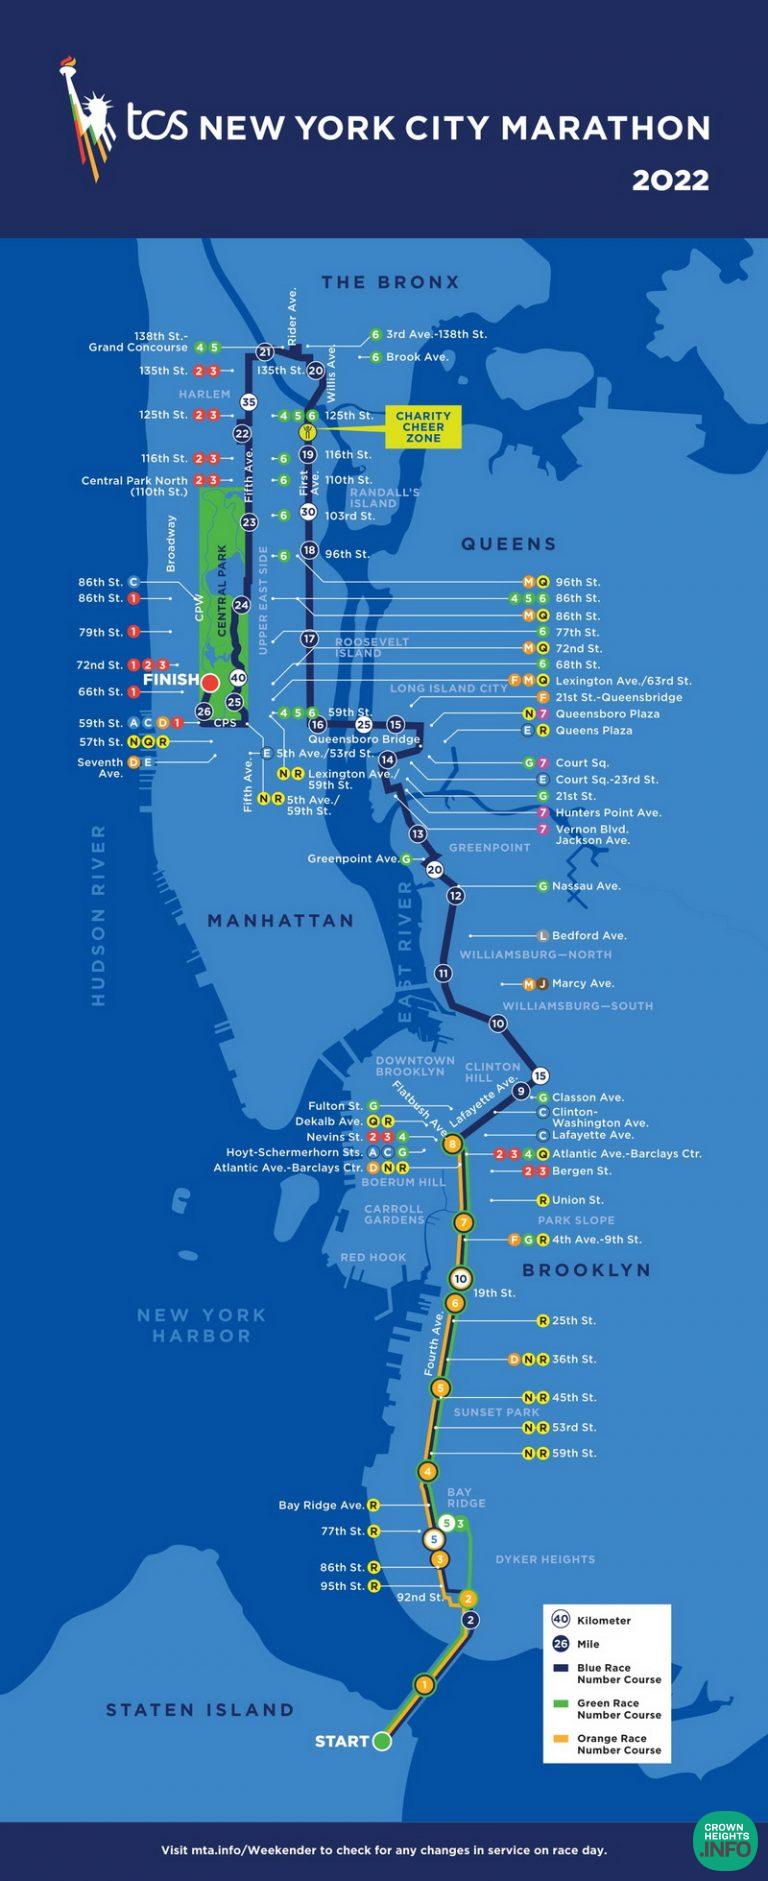 PSA NYC Marathon This Sunday, These Are The Expected Street Closures